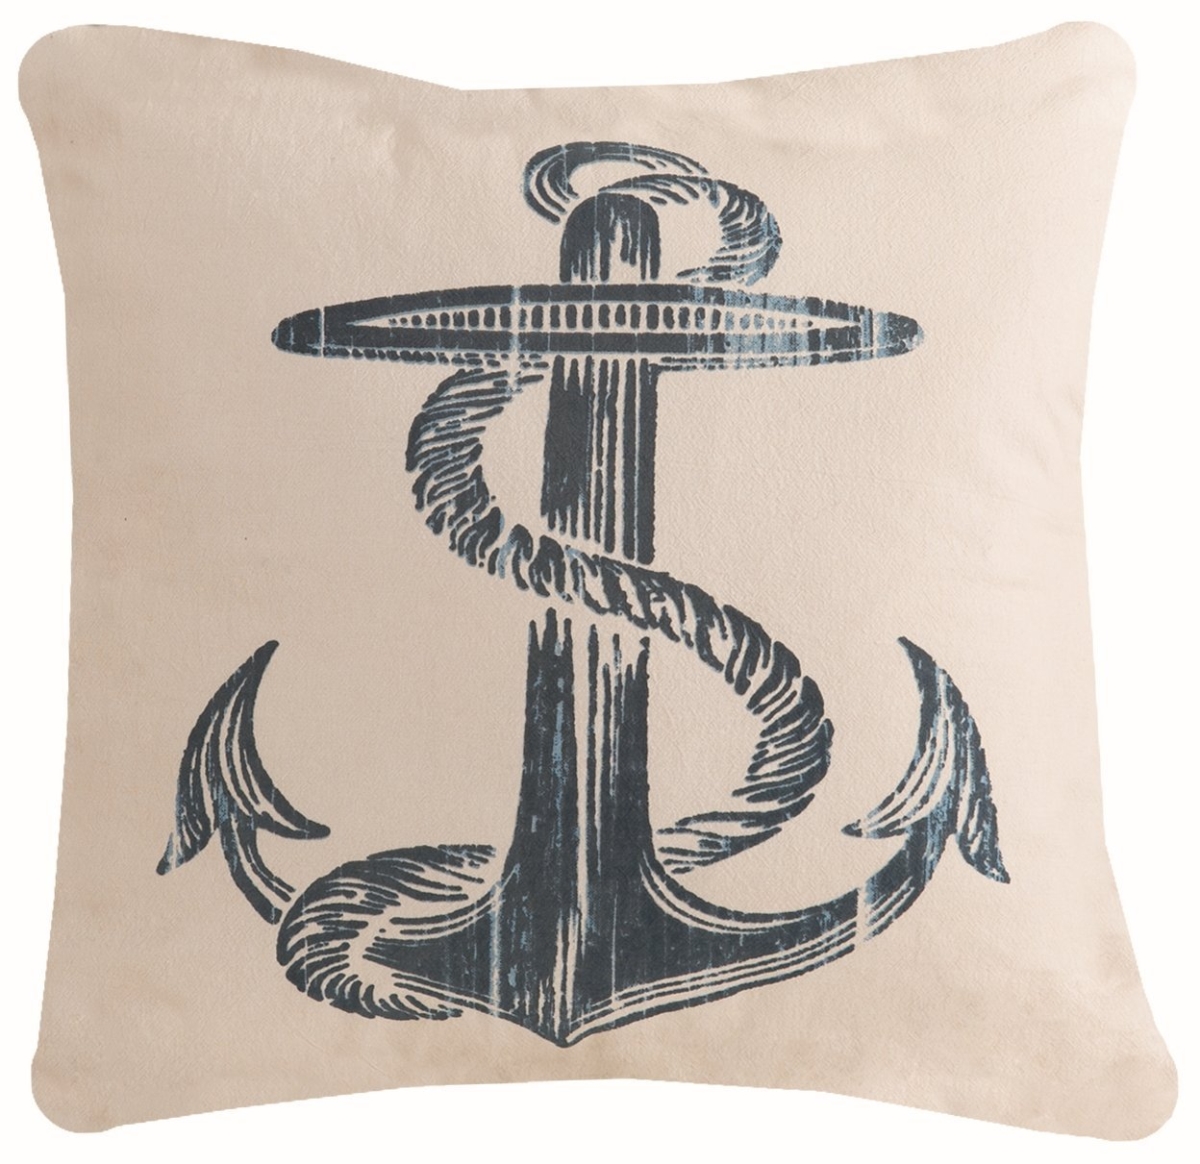 Bl-003 Lace Anchor Beach Living Pillow, 18 X 18 In.